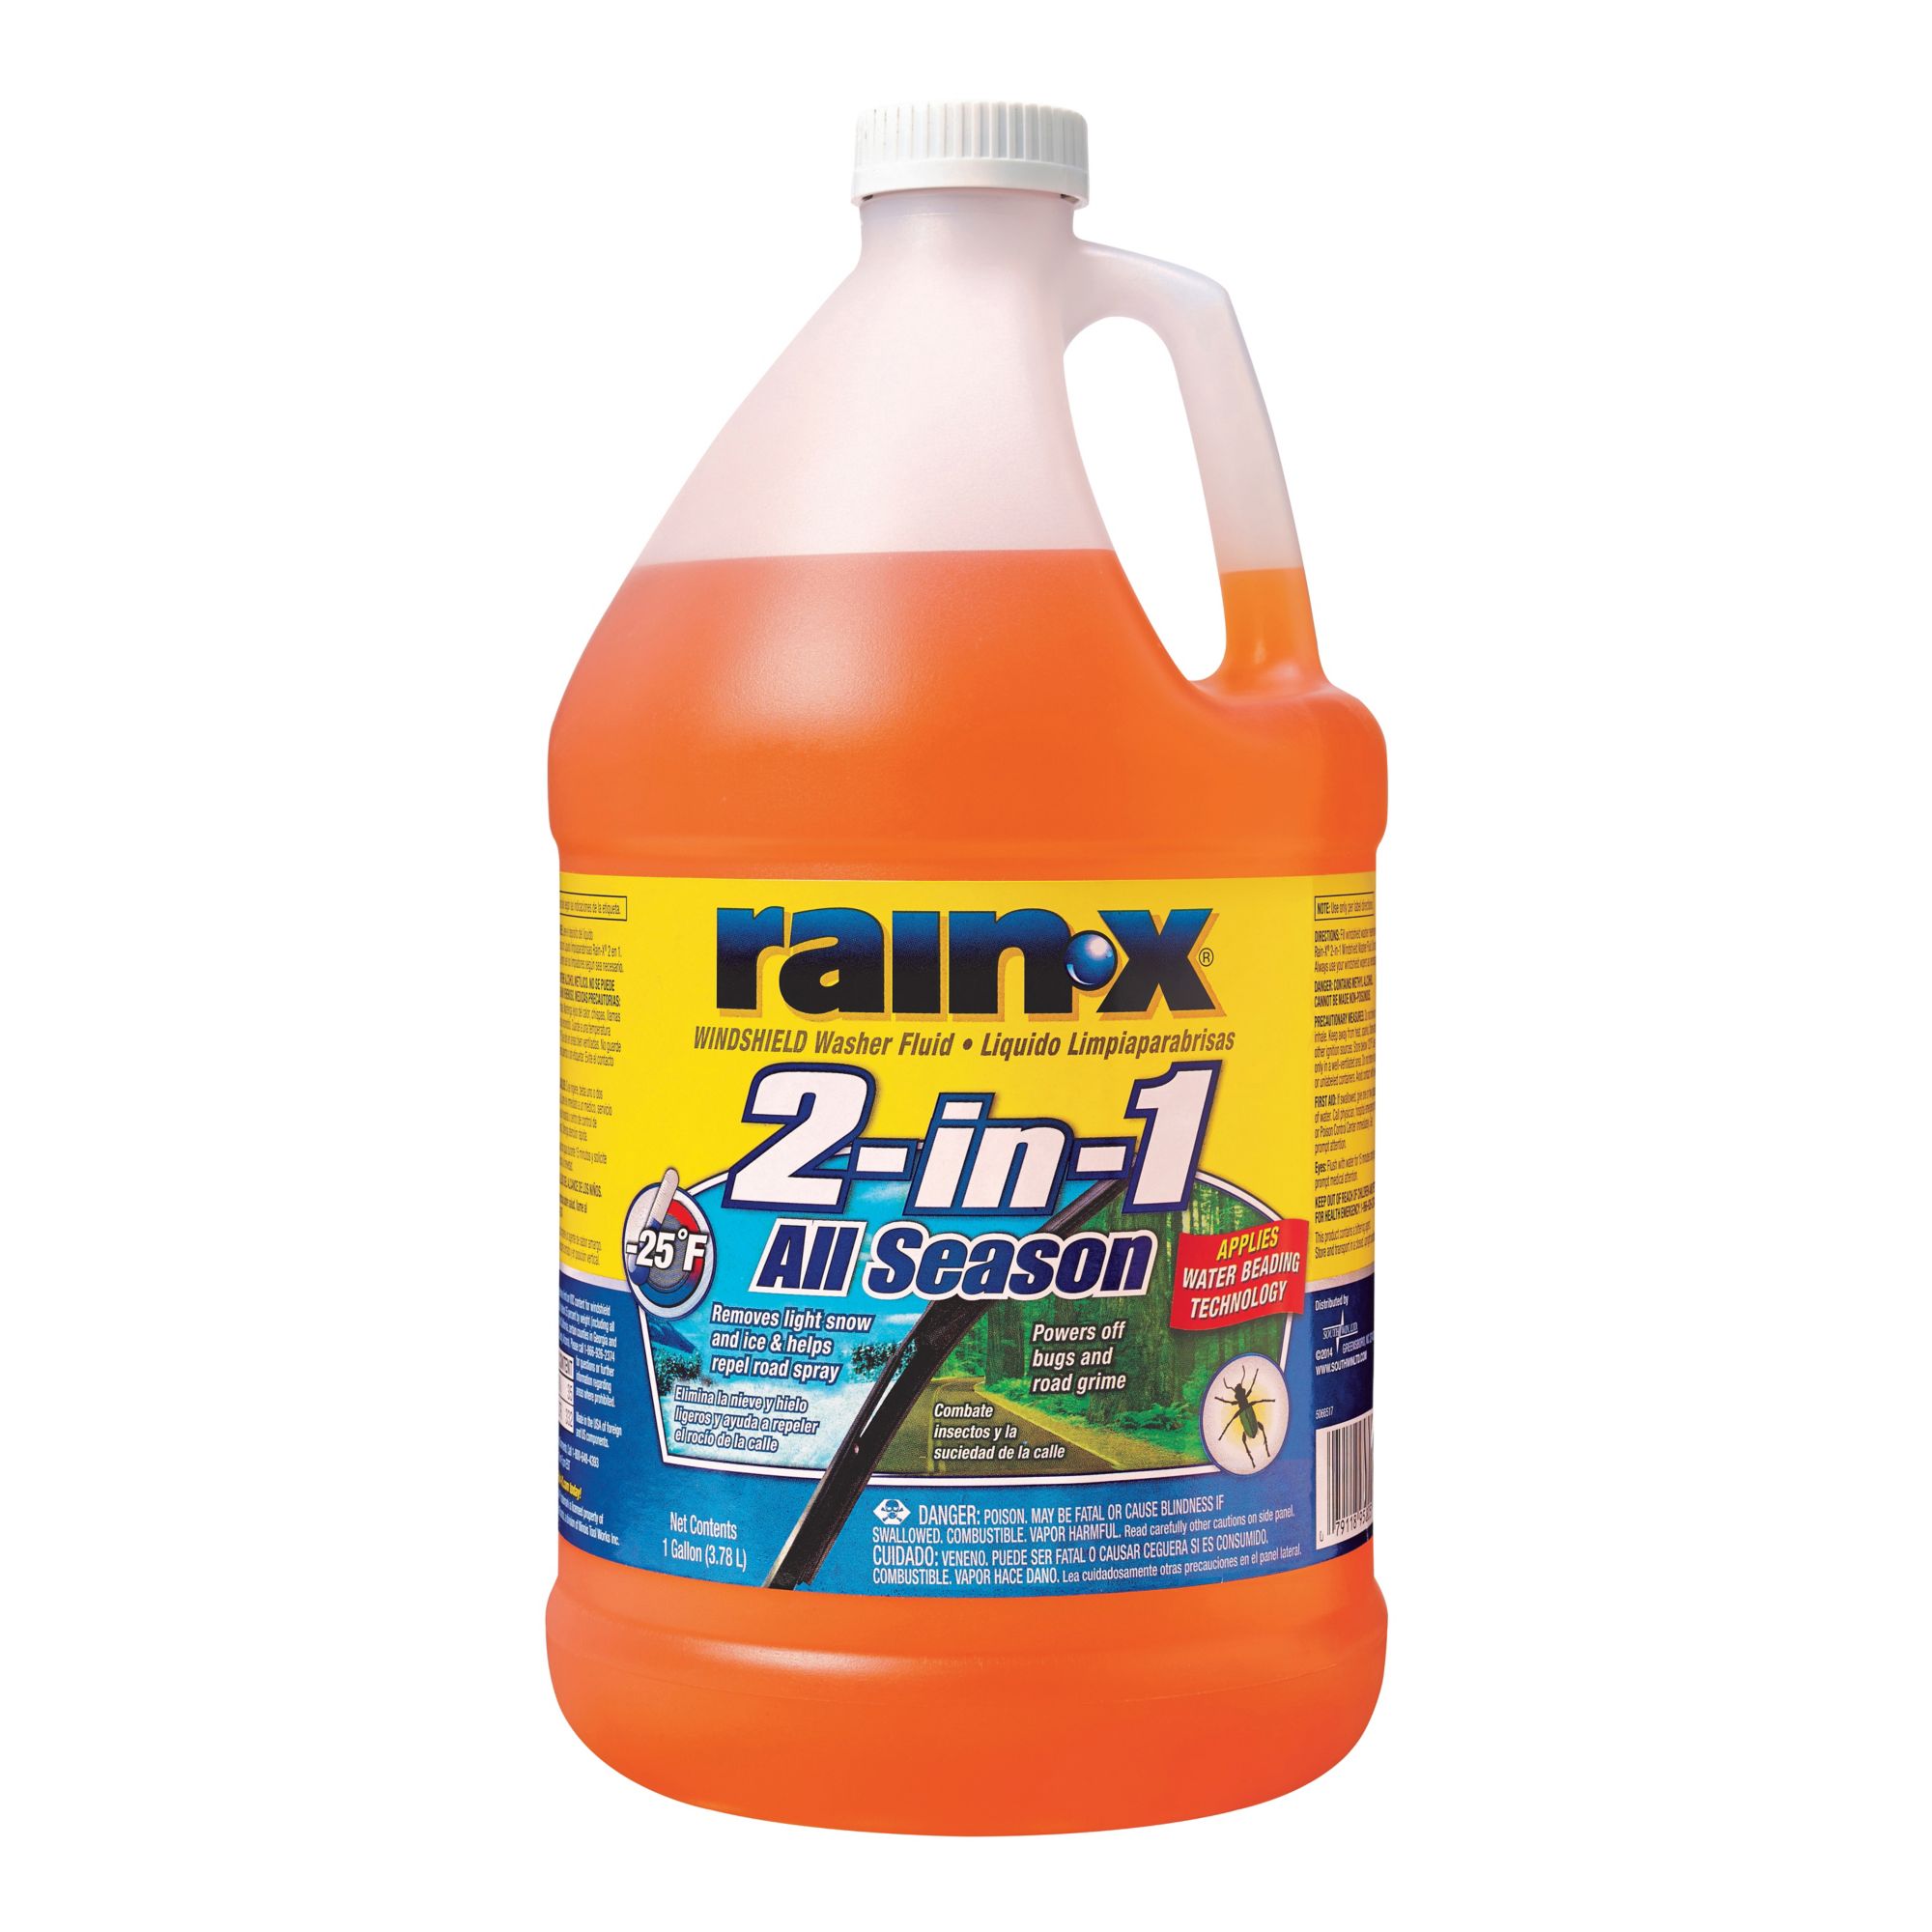 Rain-X Original 2-in-1 Windshield Washer Fluid, Removes Grime, Improves  Driving Visibility (32° F)